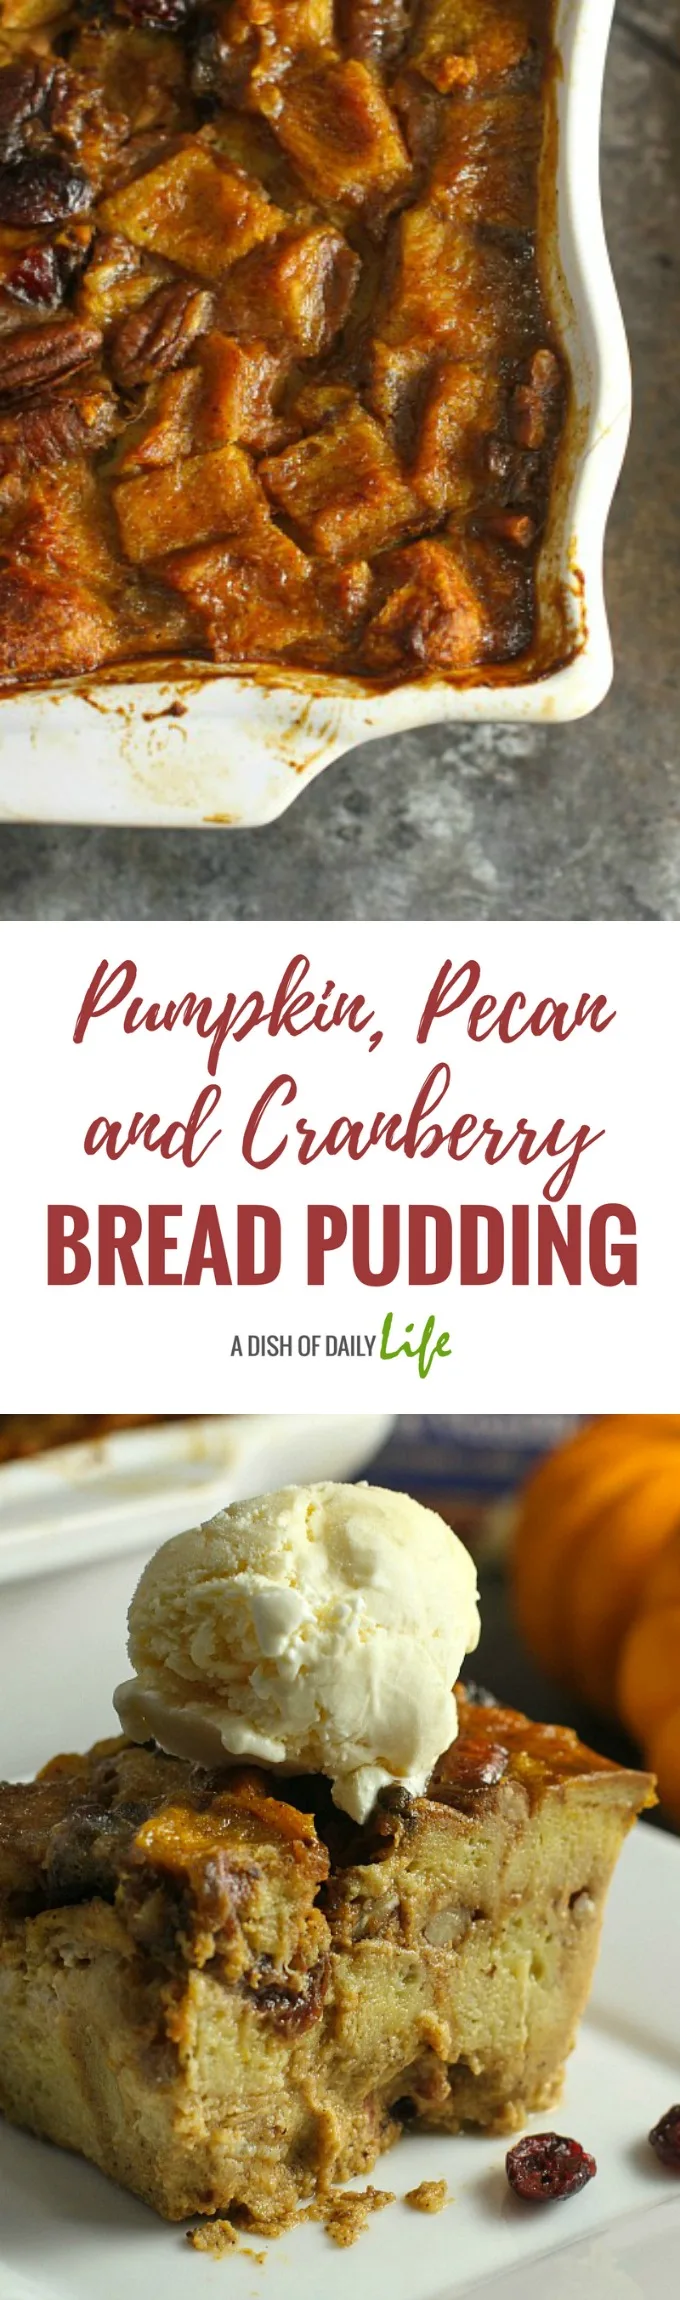 Pumpkin, Pecan and Cranberry Bread Pudding...this fun and festive dessert is the perfect finishing touch to this elegant dinner party menu for the holidays! #dessert #breadpudding #pumpkin #cranberries 